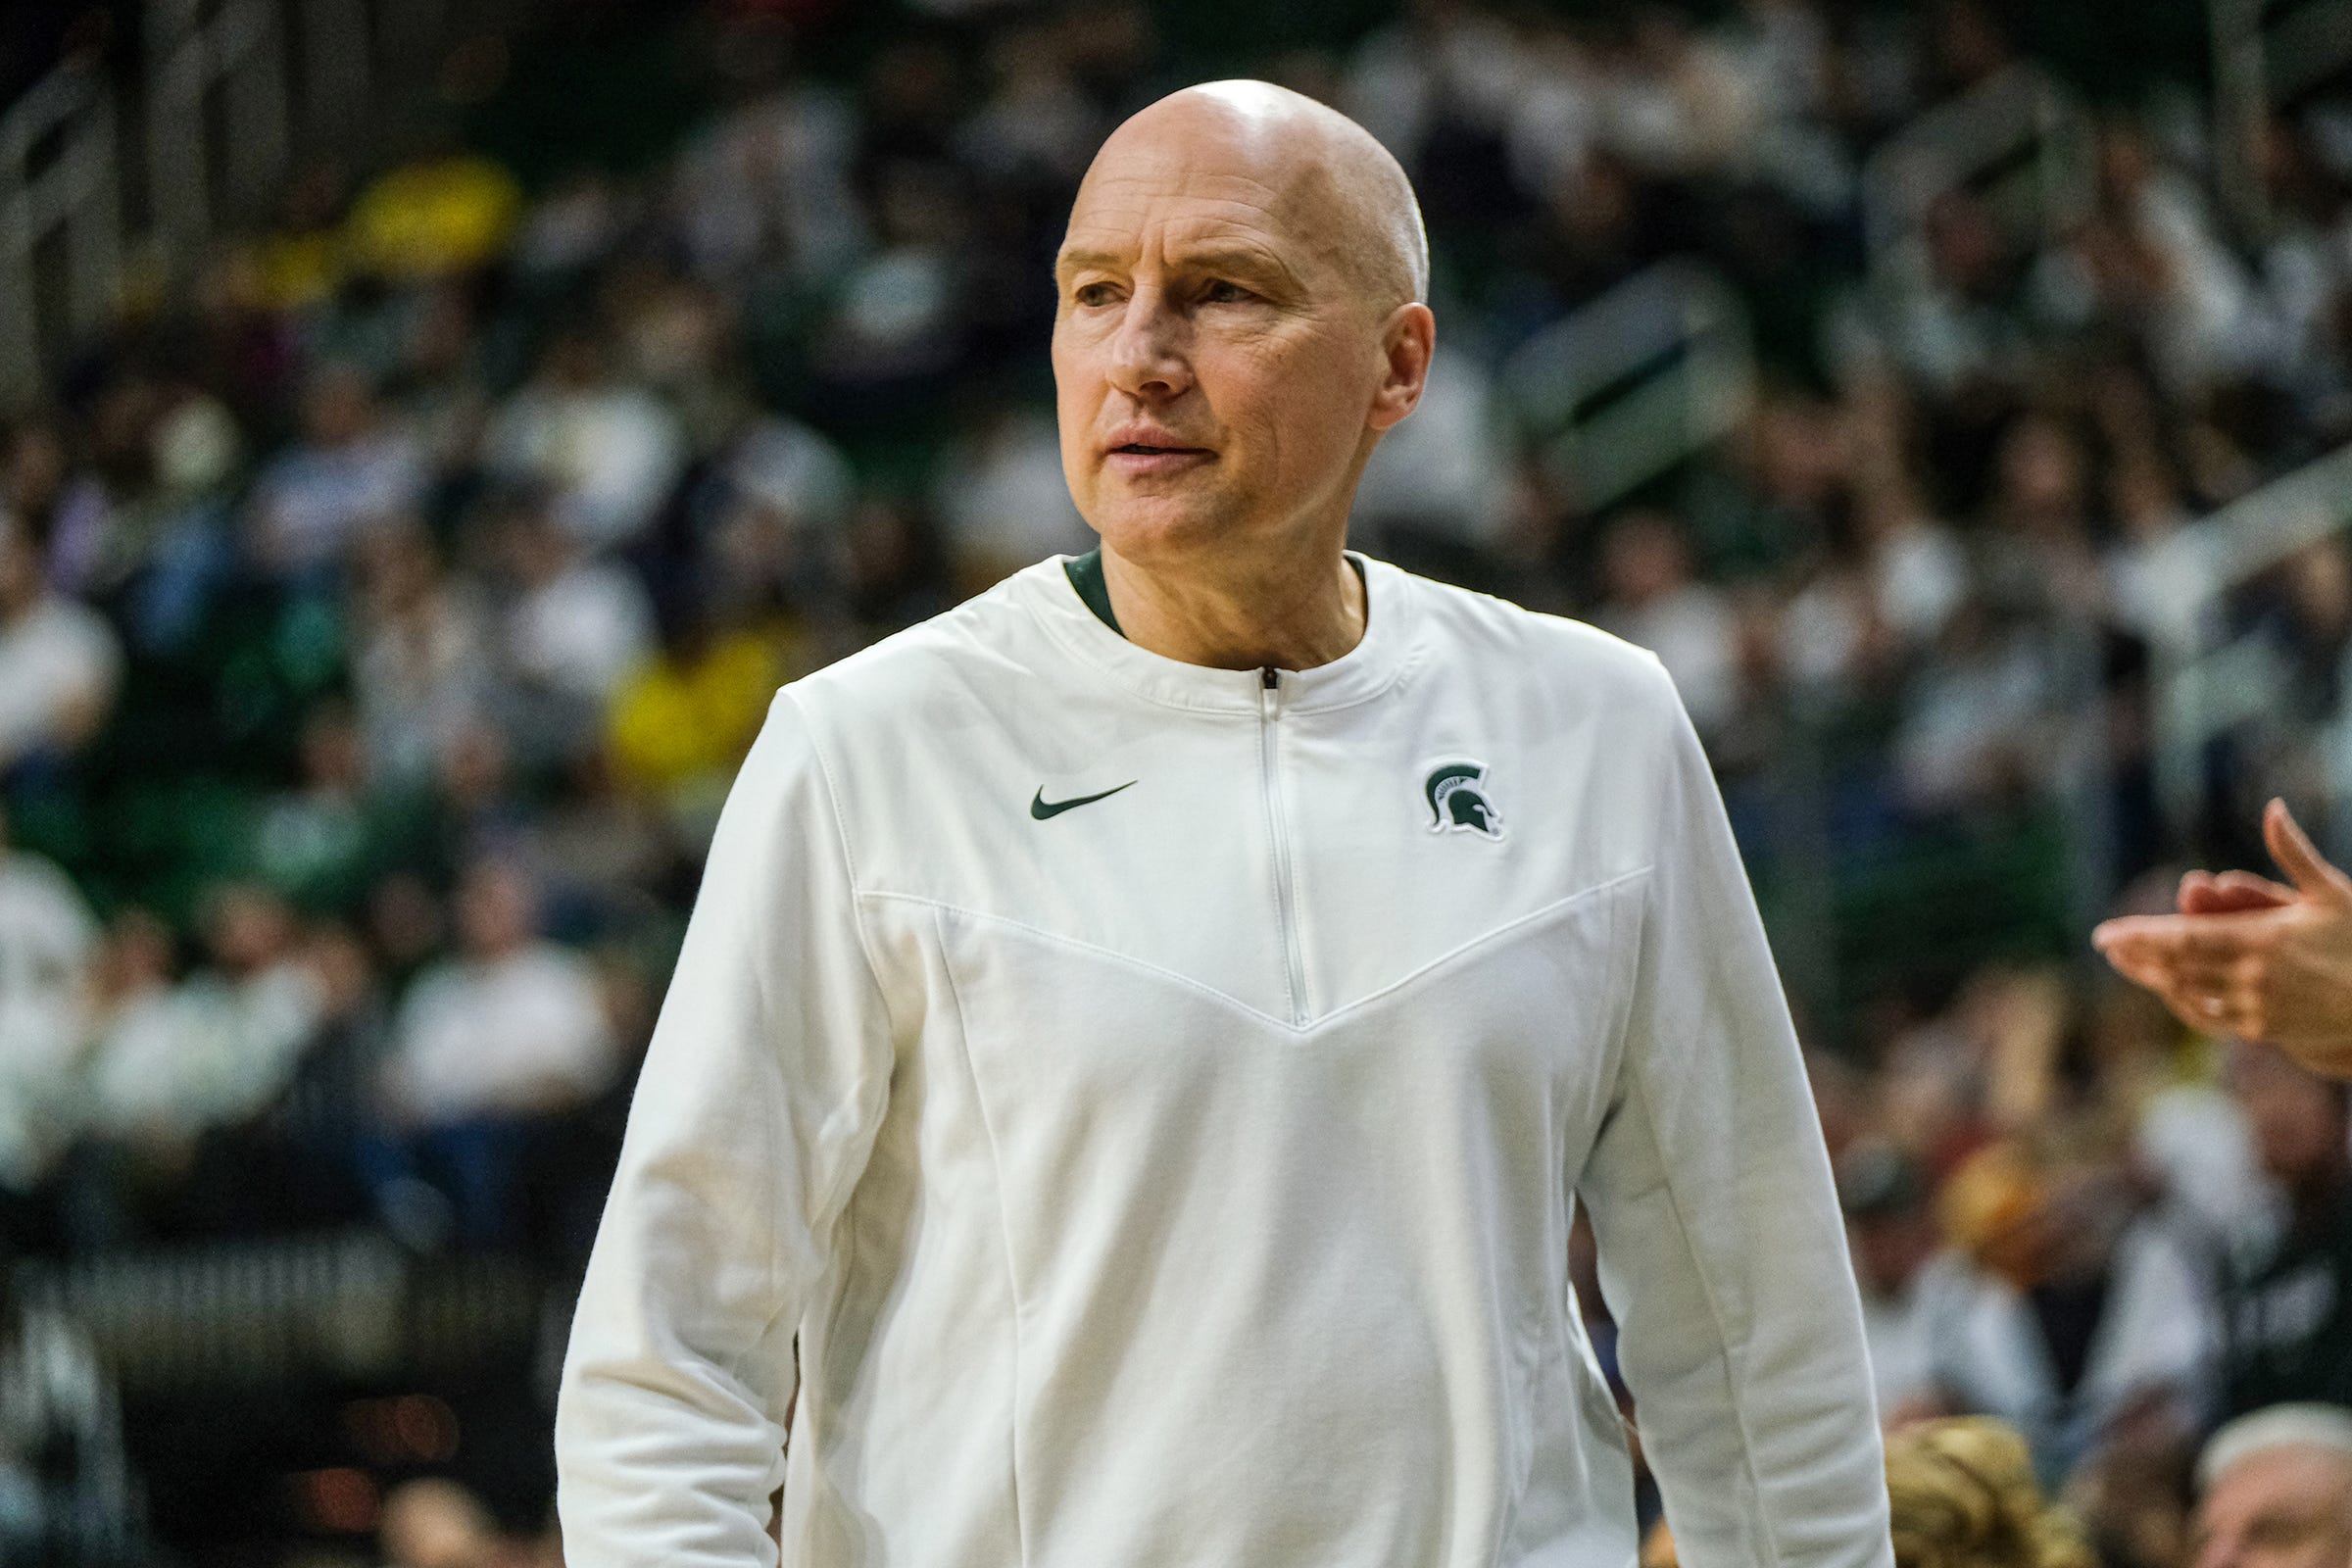 Women's basketball: Dean Lockwood's steadiness carrying Michigan State